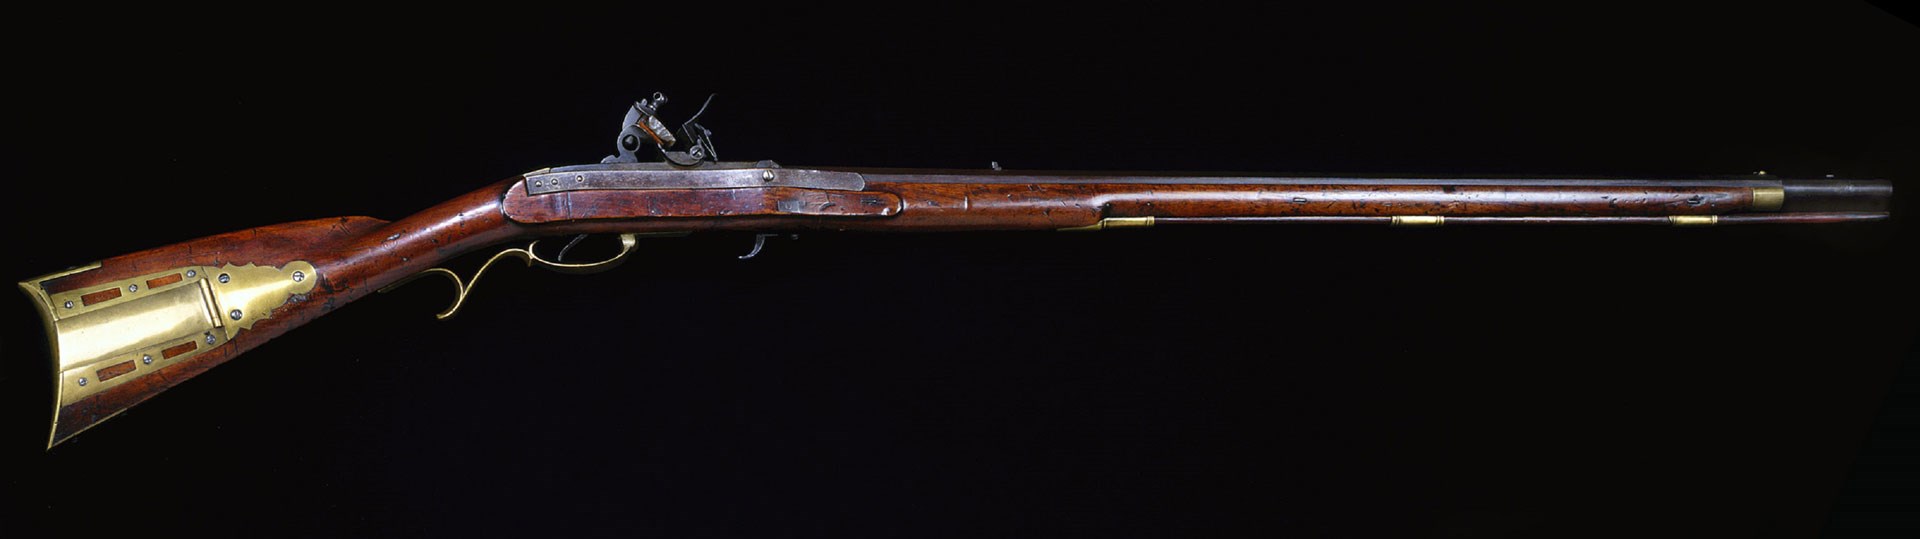 This extremely rare Model 1817 U.S. contract breechloading flintlock rifle is from John H. Hall's first government contract for 100 firearms, which were sent to Fort Bellefontaine. Fewer than five examples are known to exist. Image courtesy of the Missouri History Museum.